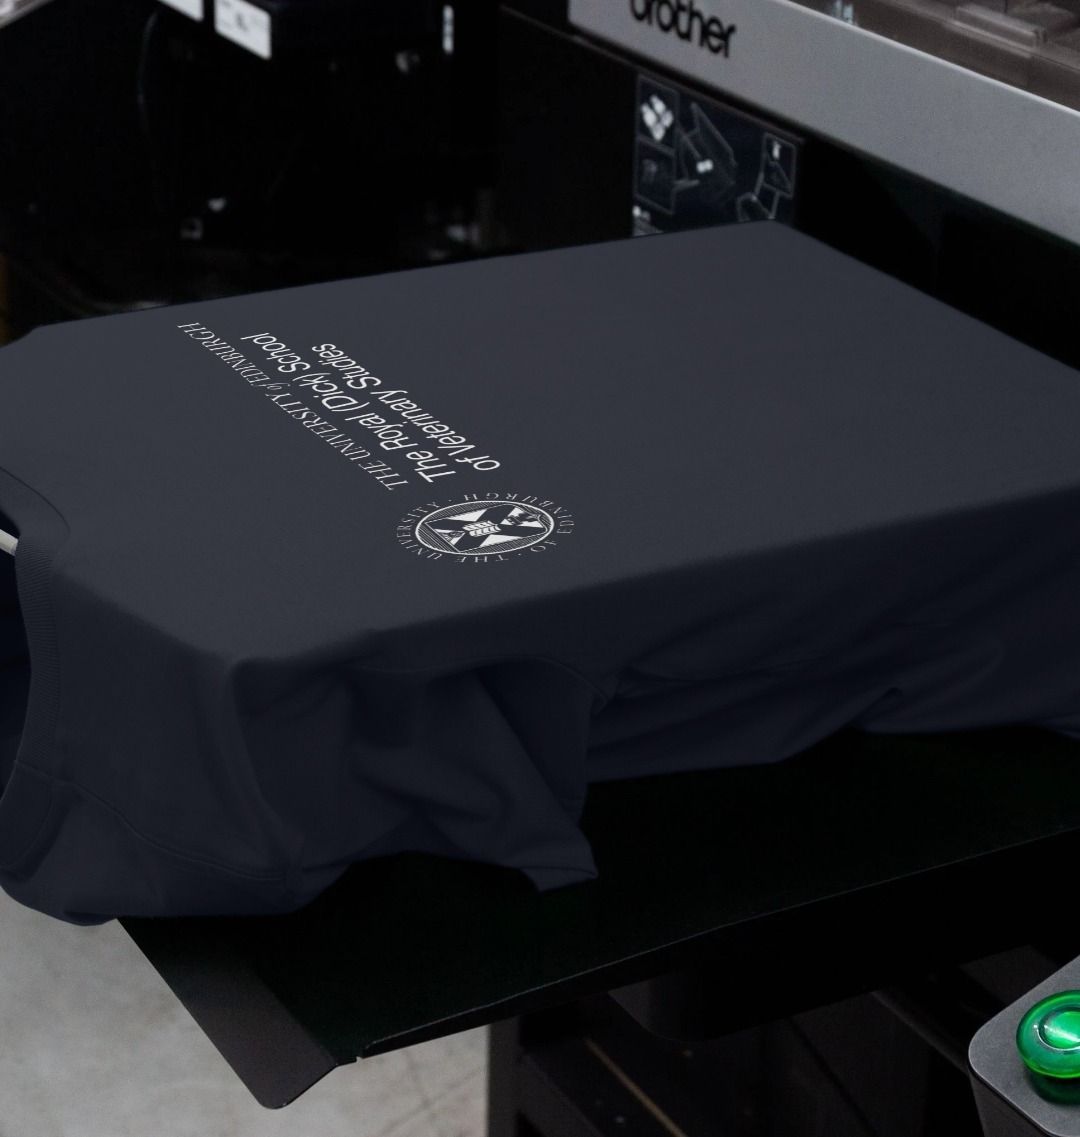 Our Royal (Dick) Veterinary T Shirt being printed by our print on demand partner, teemill.